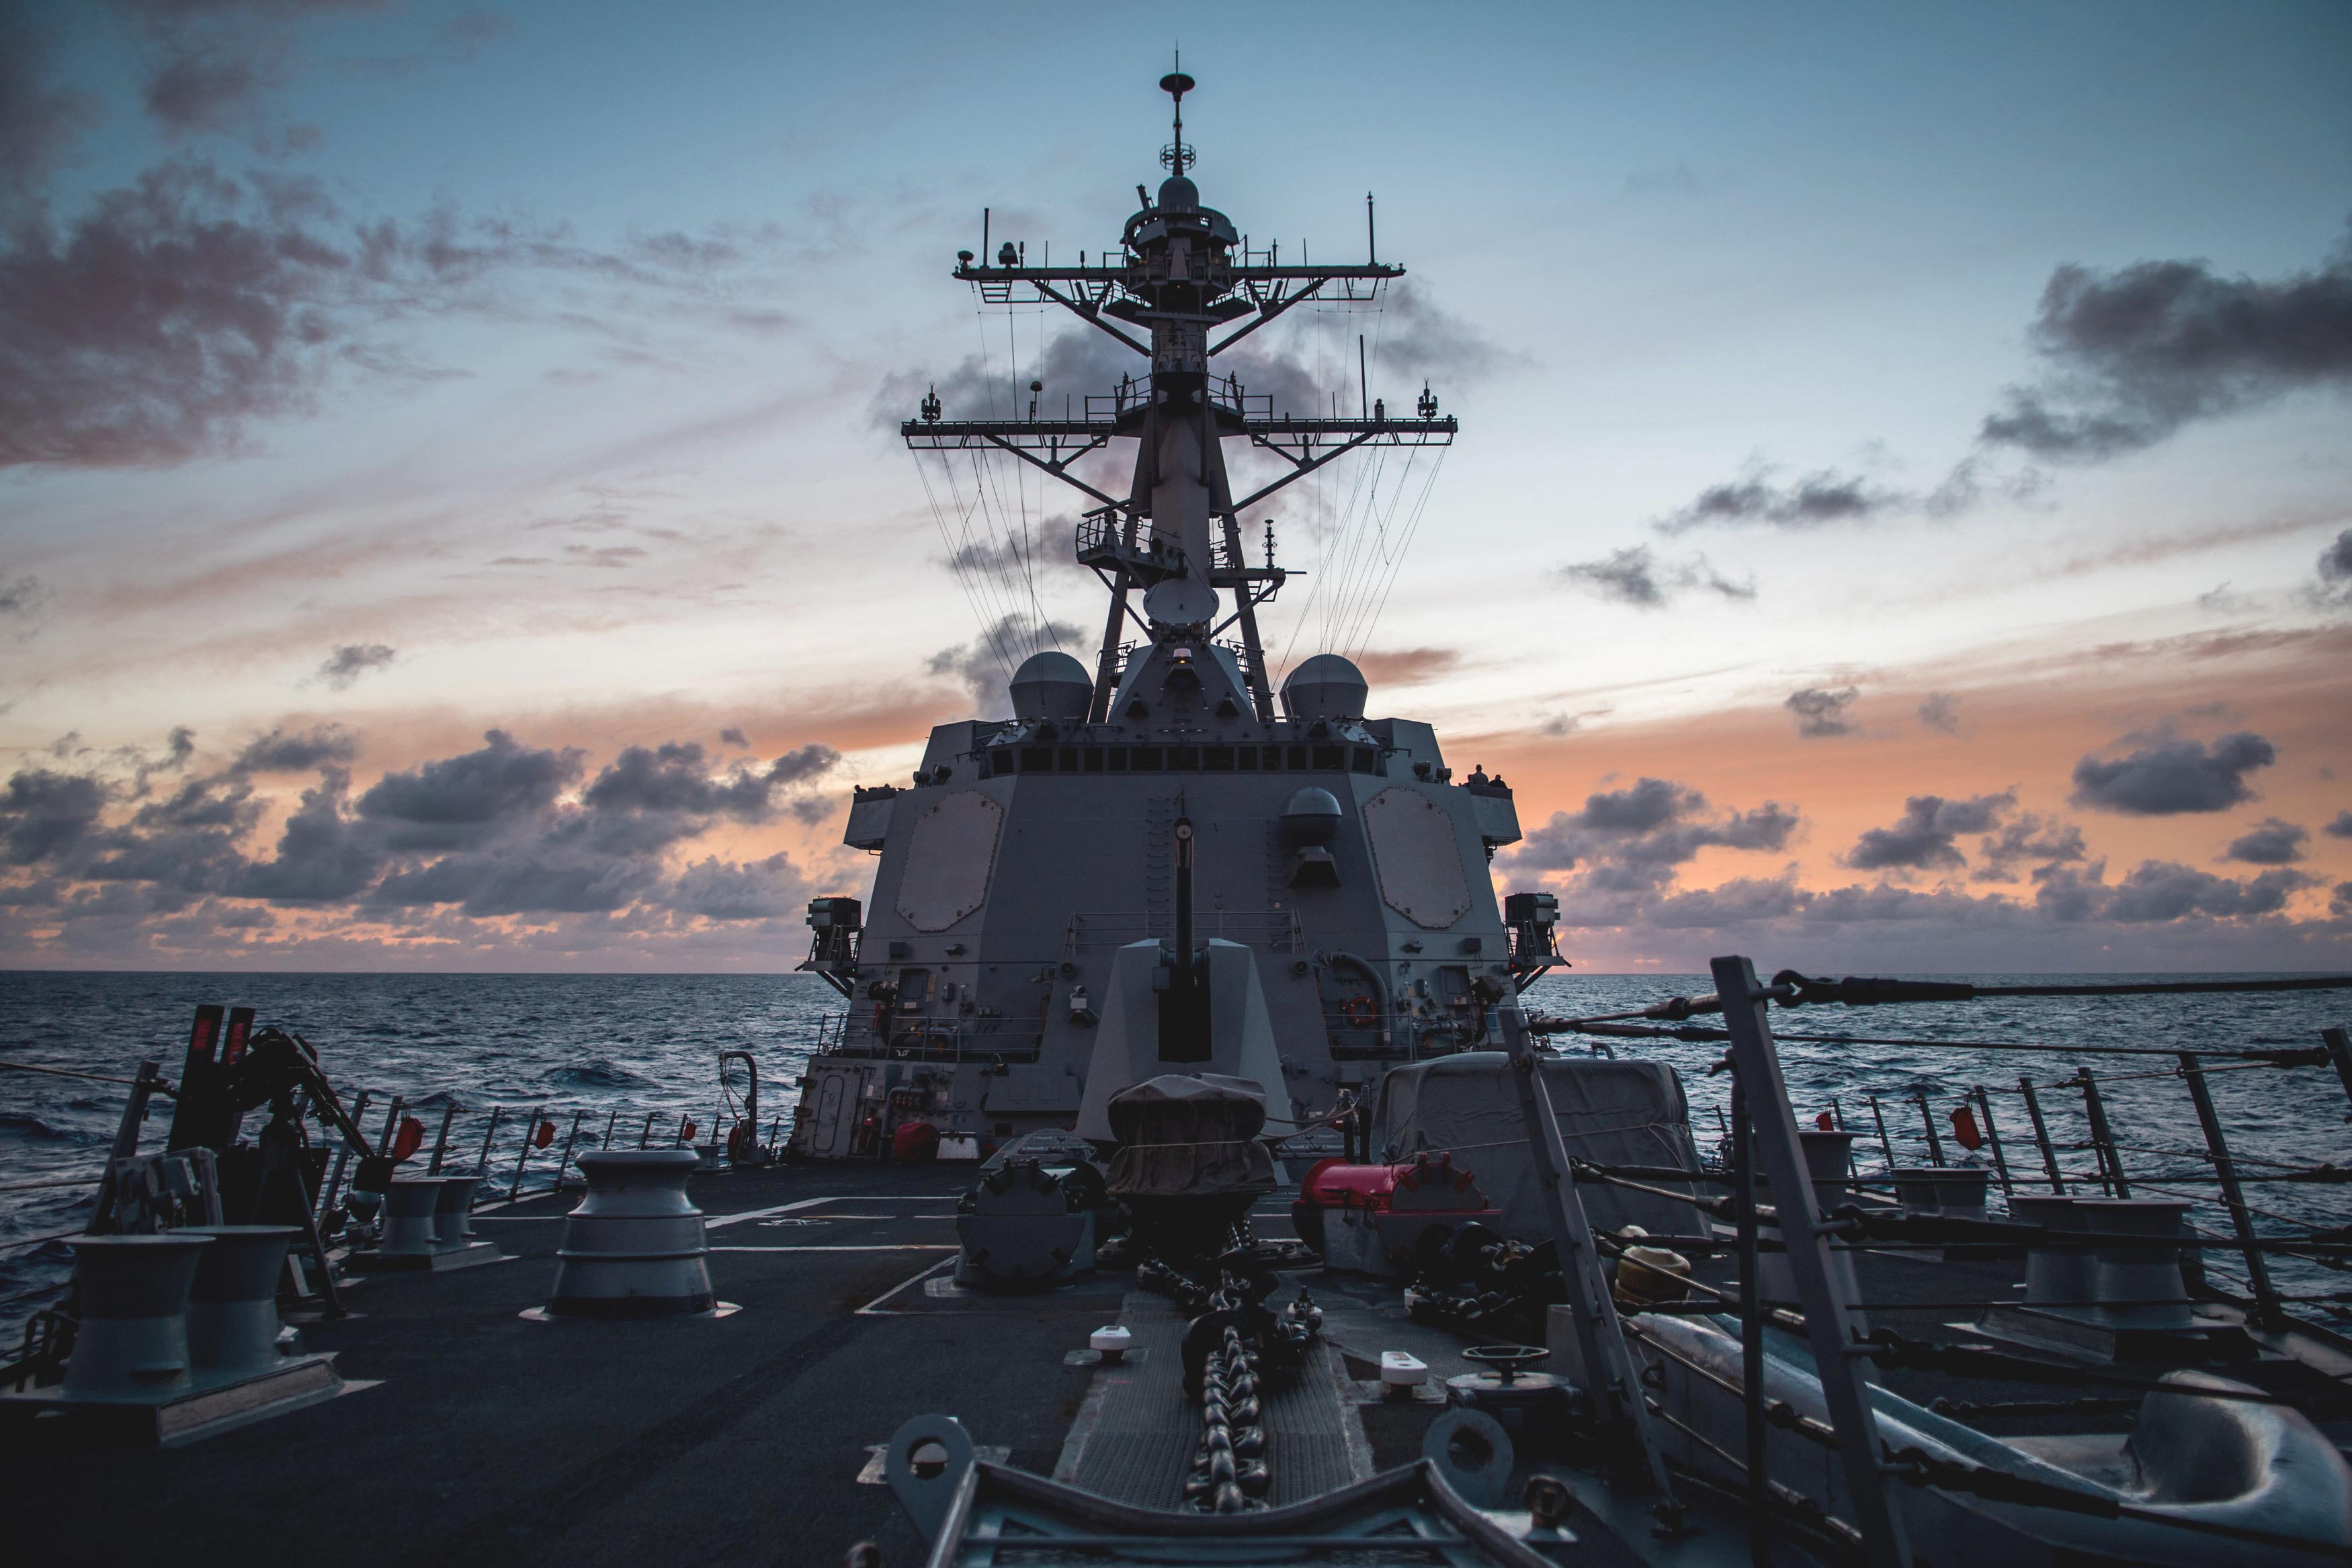 The guided-missile destroyer USS Dewey (DDG 105) transits the Pacific Ocean while participating in Rim of the Pacific (RIMPAC) exercise 2018